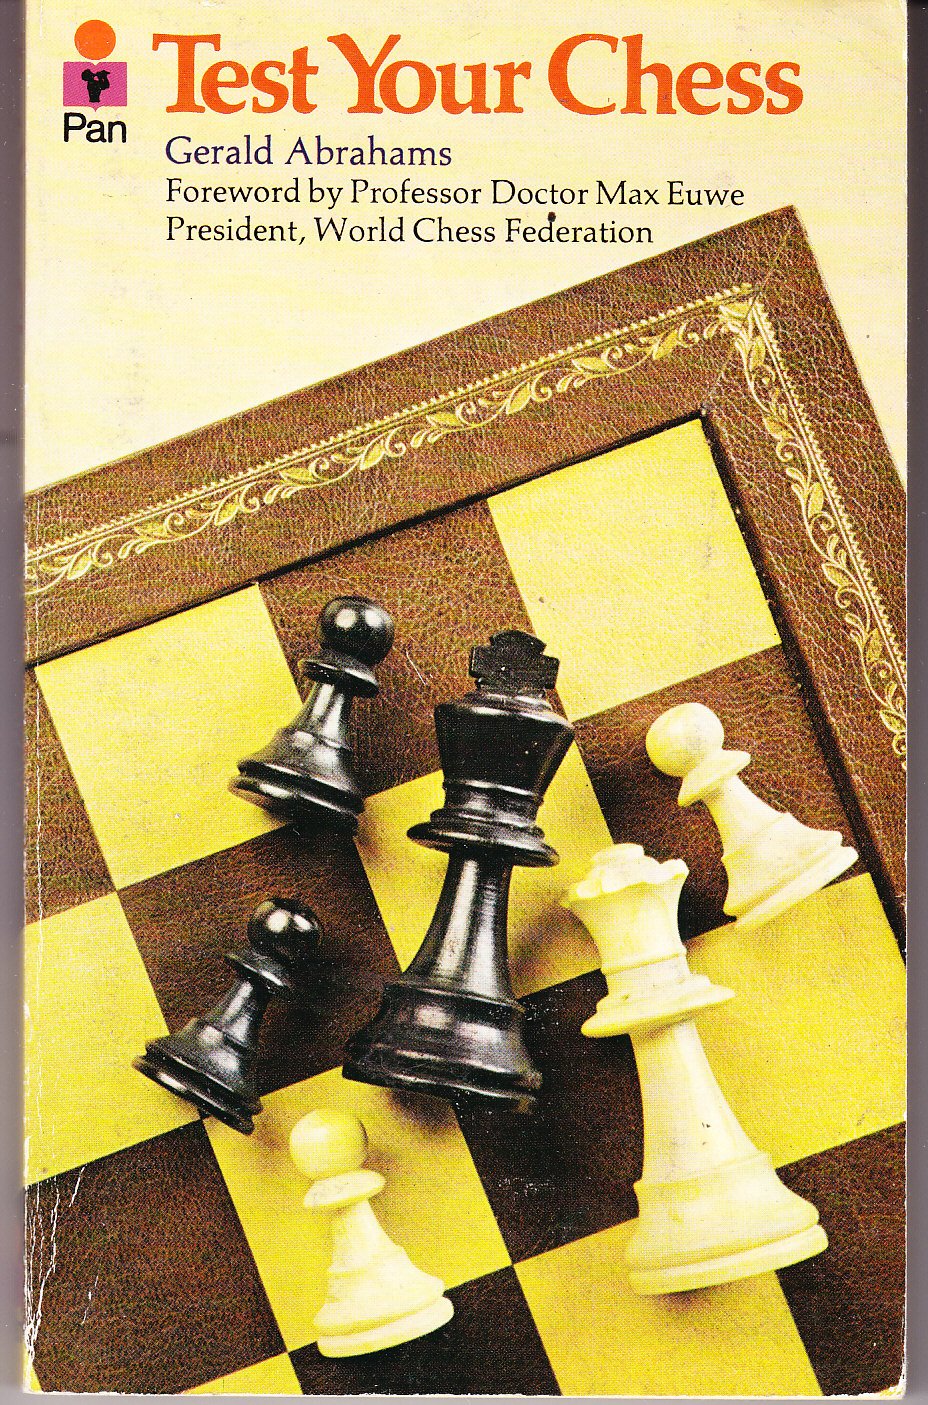 Test Your Chess, Gerald Abrahams, Constable and co, 1963, ISBN 0 330 24336 5 